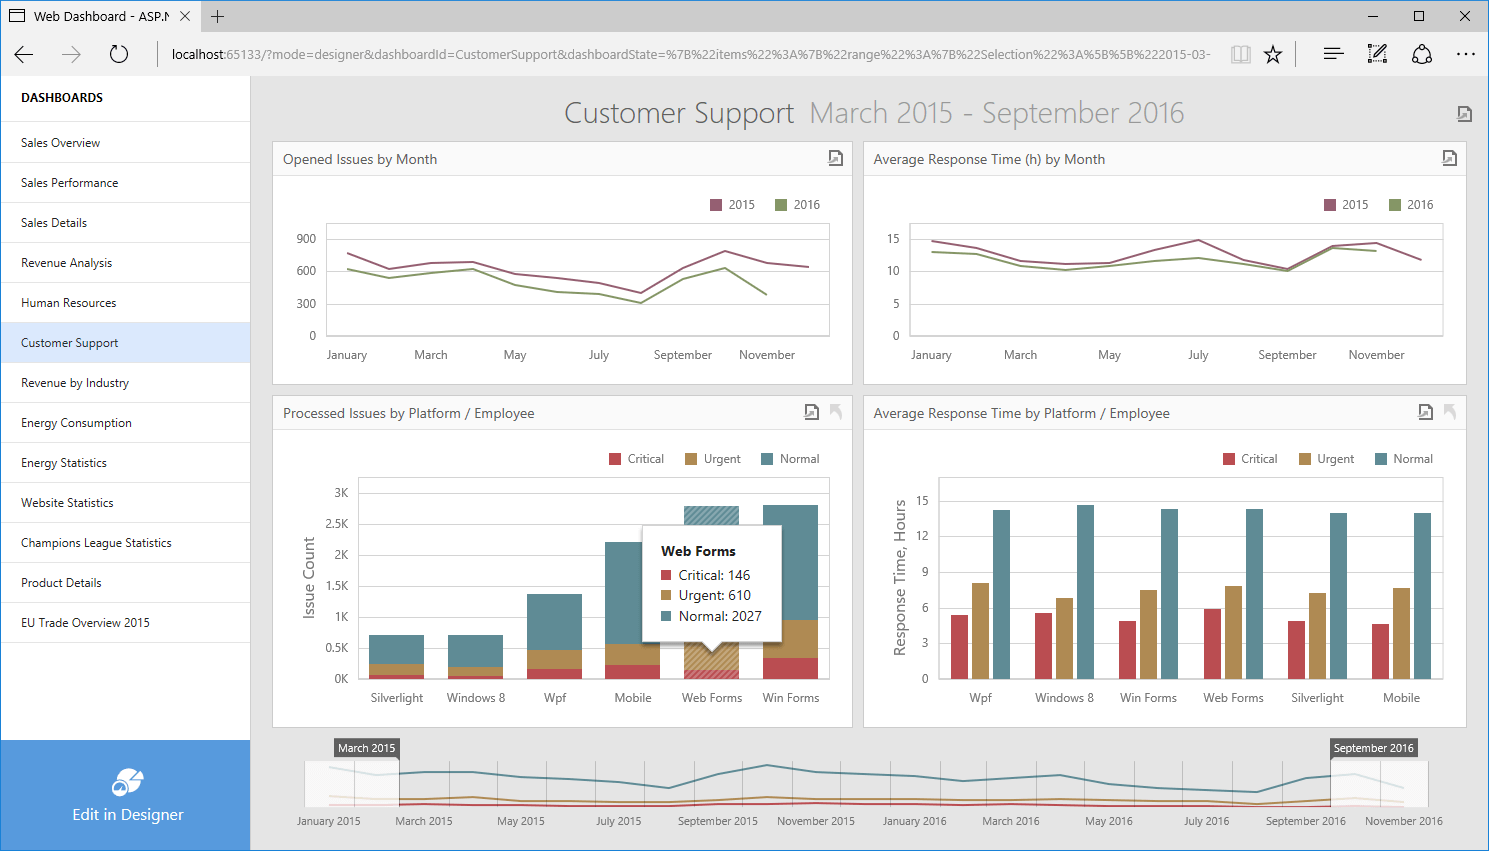 Integrated Web Dashboard Viewer